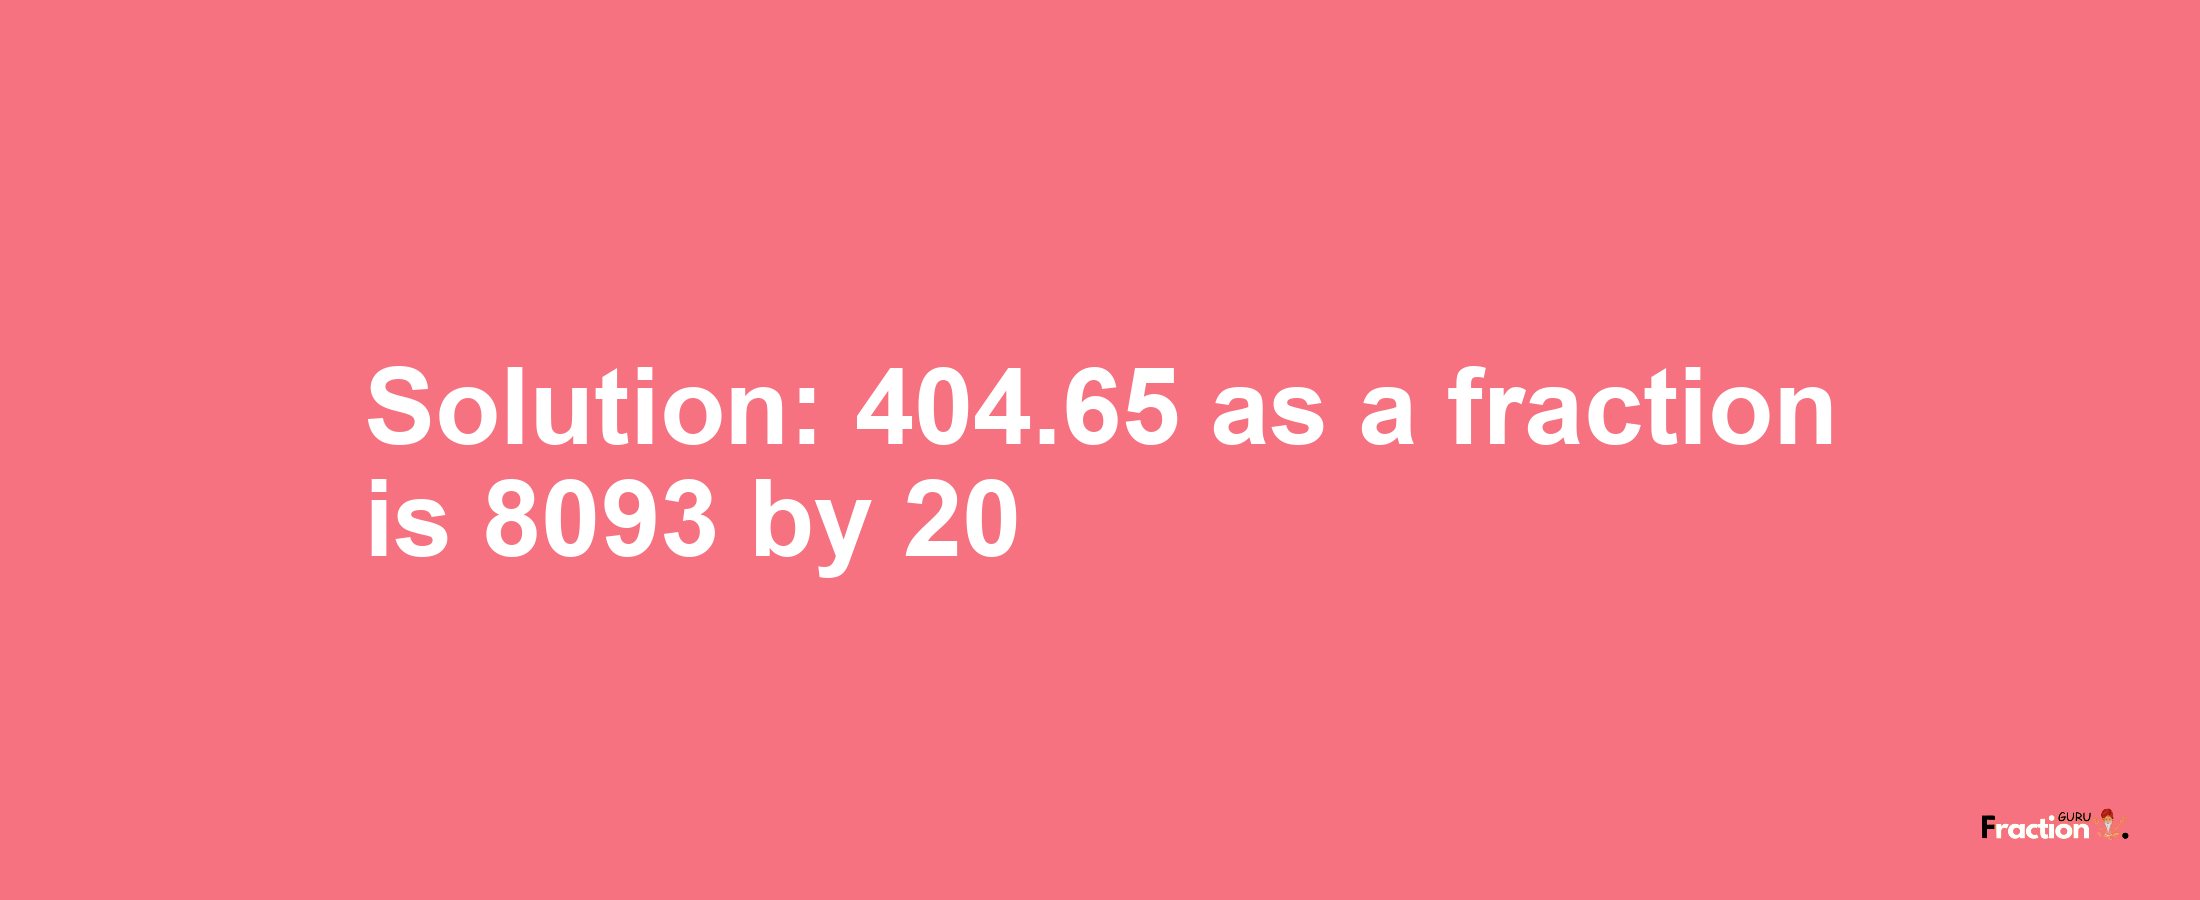 Solution:404.65 as a fraction is 8093/20